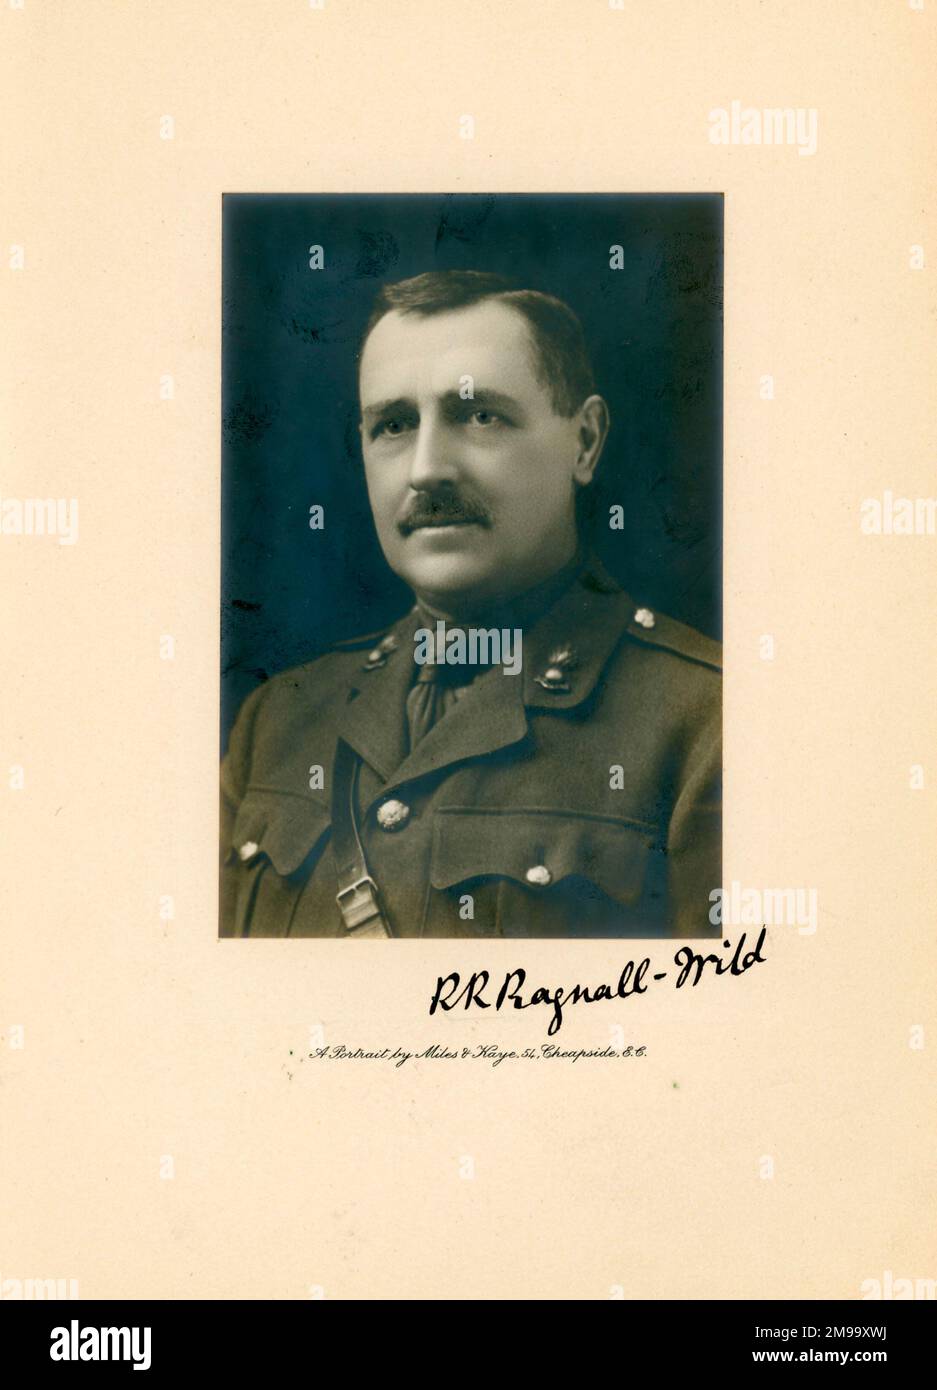 IAE President, 1917-18, Brigadier-General Ralph Kirkby Bagnall-Wild, by Miles and Kaye. Stock Photo